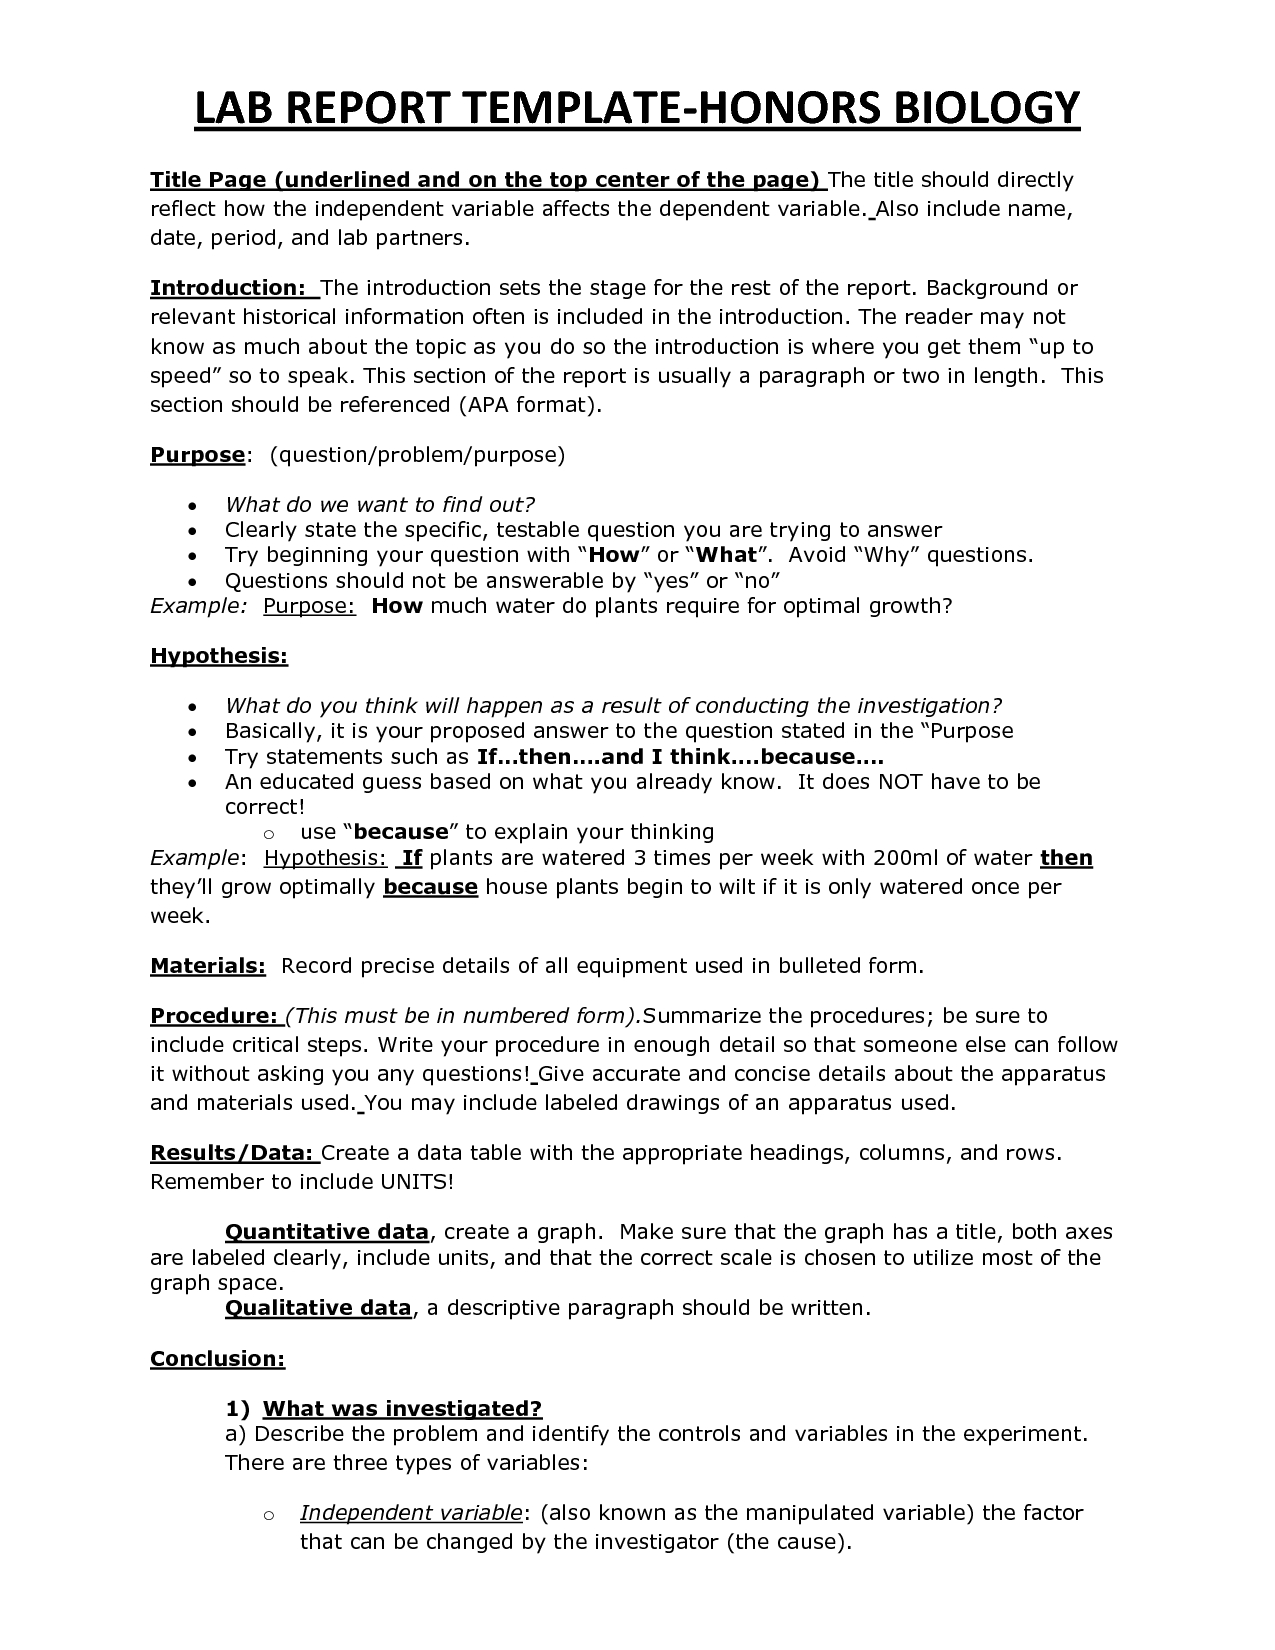 Chs Hbio Lab Report Template | Biology | Lab Report Template Regarding Introduction Template For Report